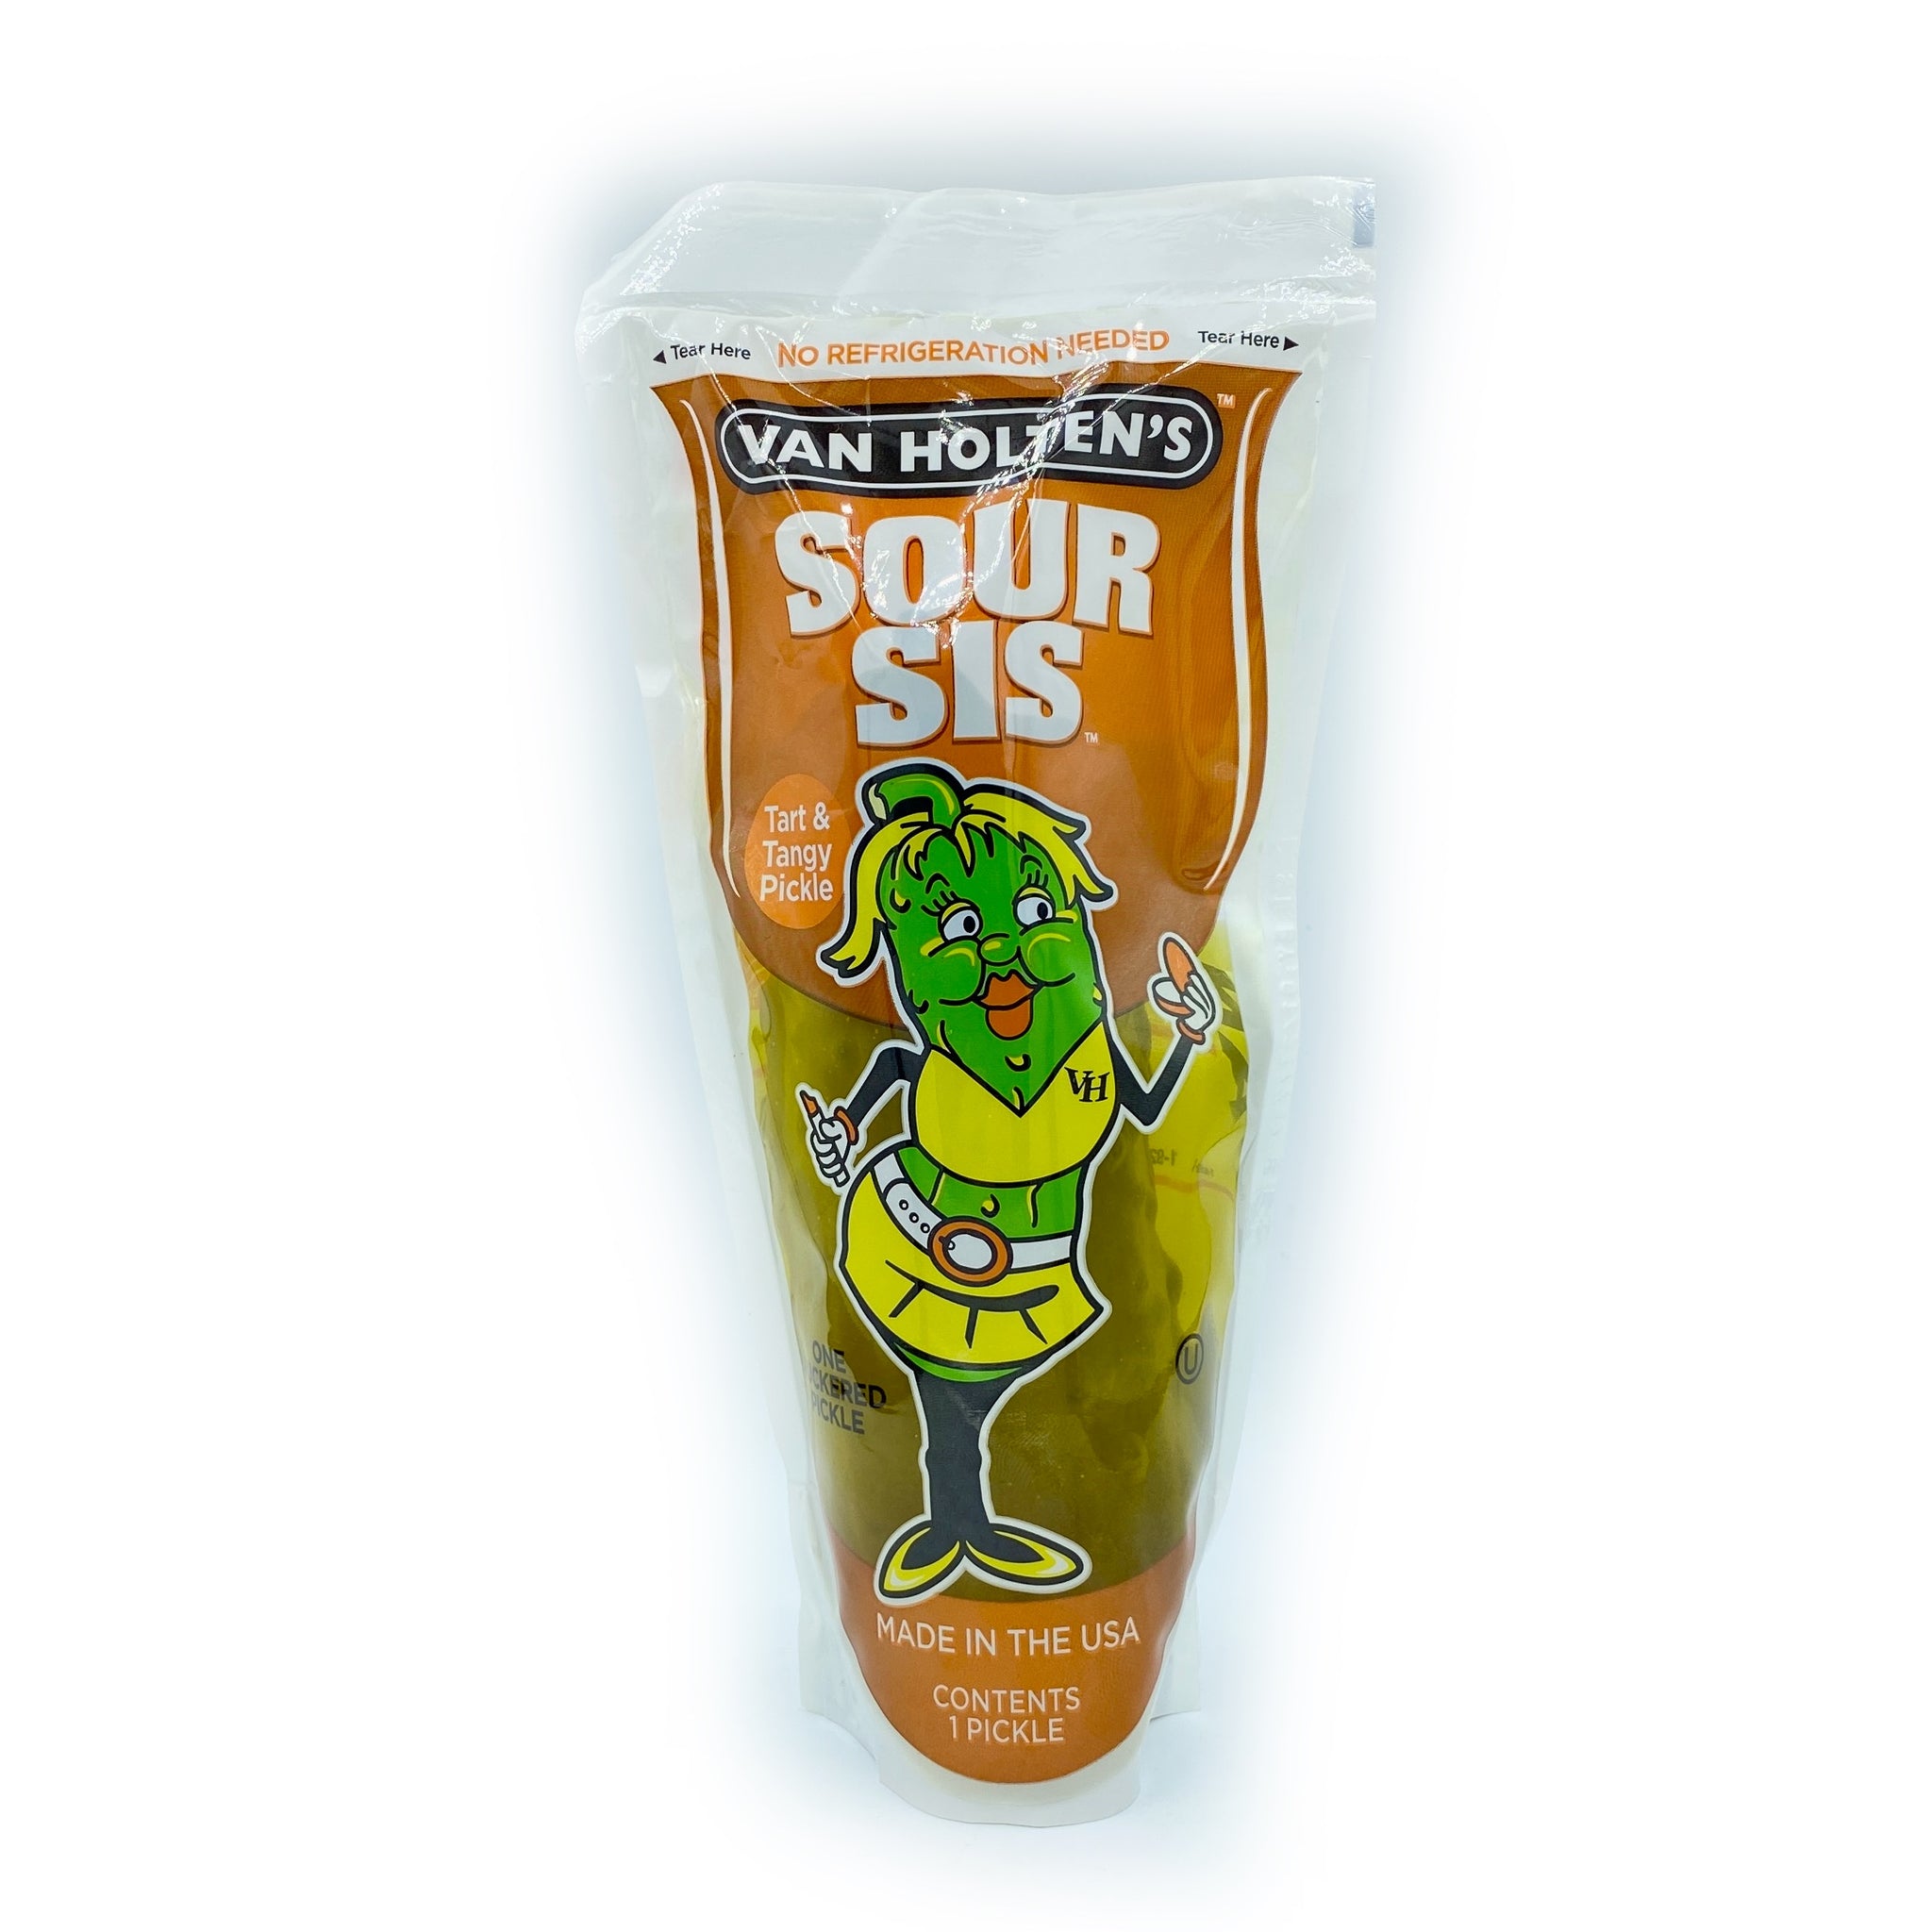 Sour Sis Pickles in a Pouch package